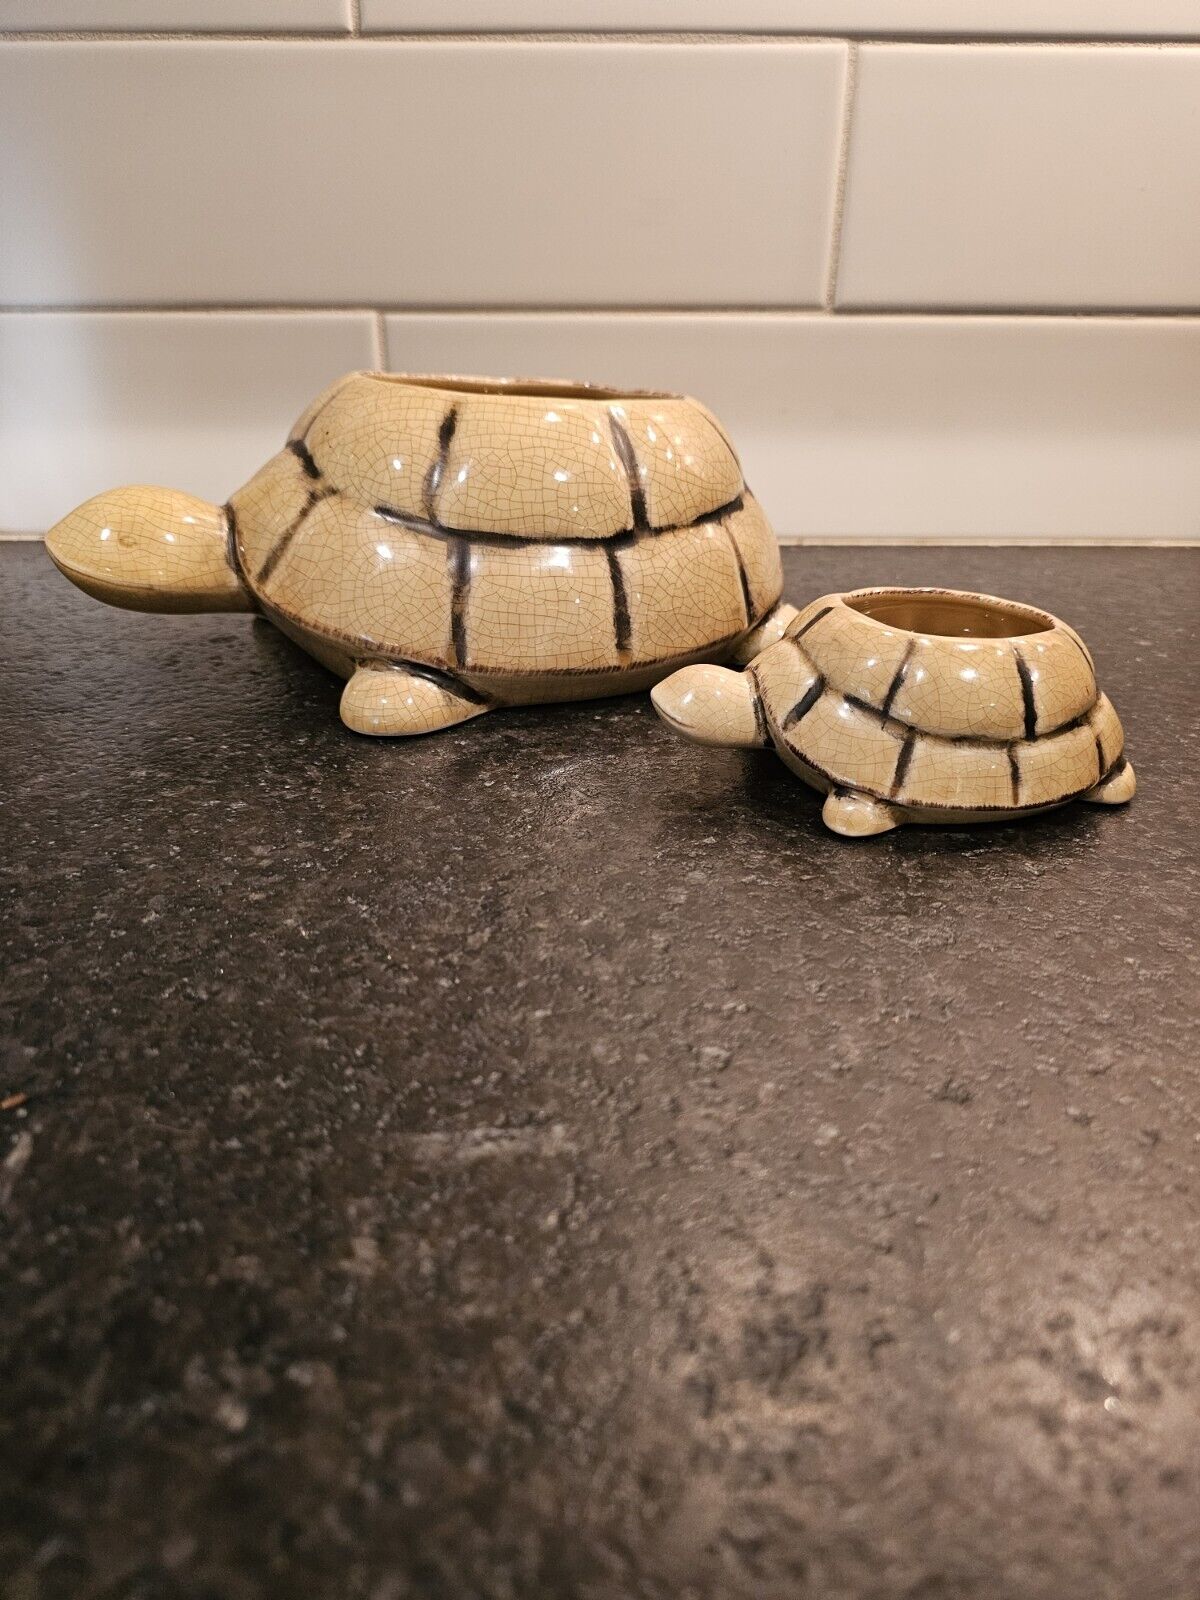 Set Of 2 Turtle Planters- One Small And One Large